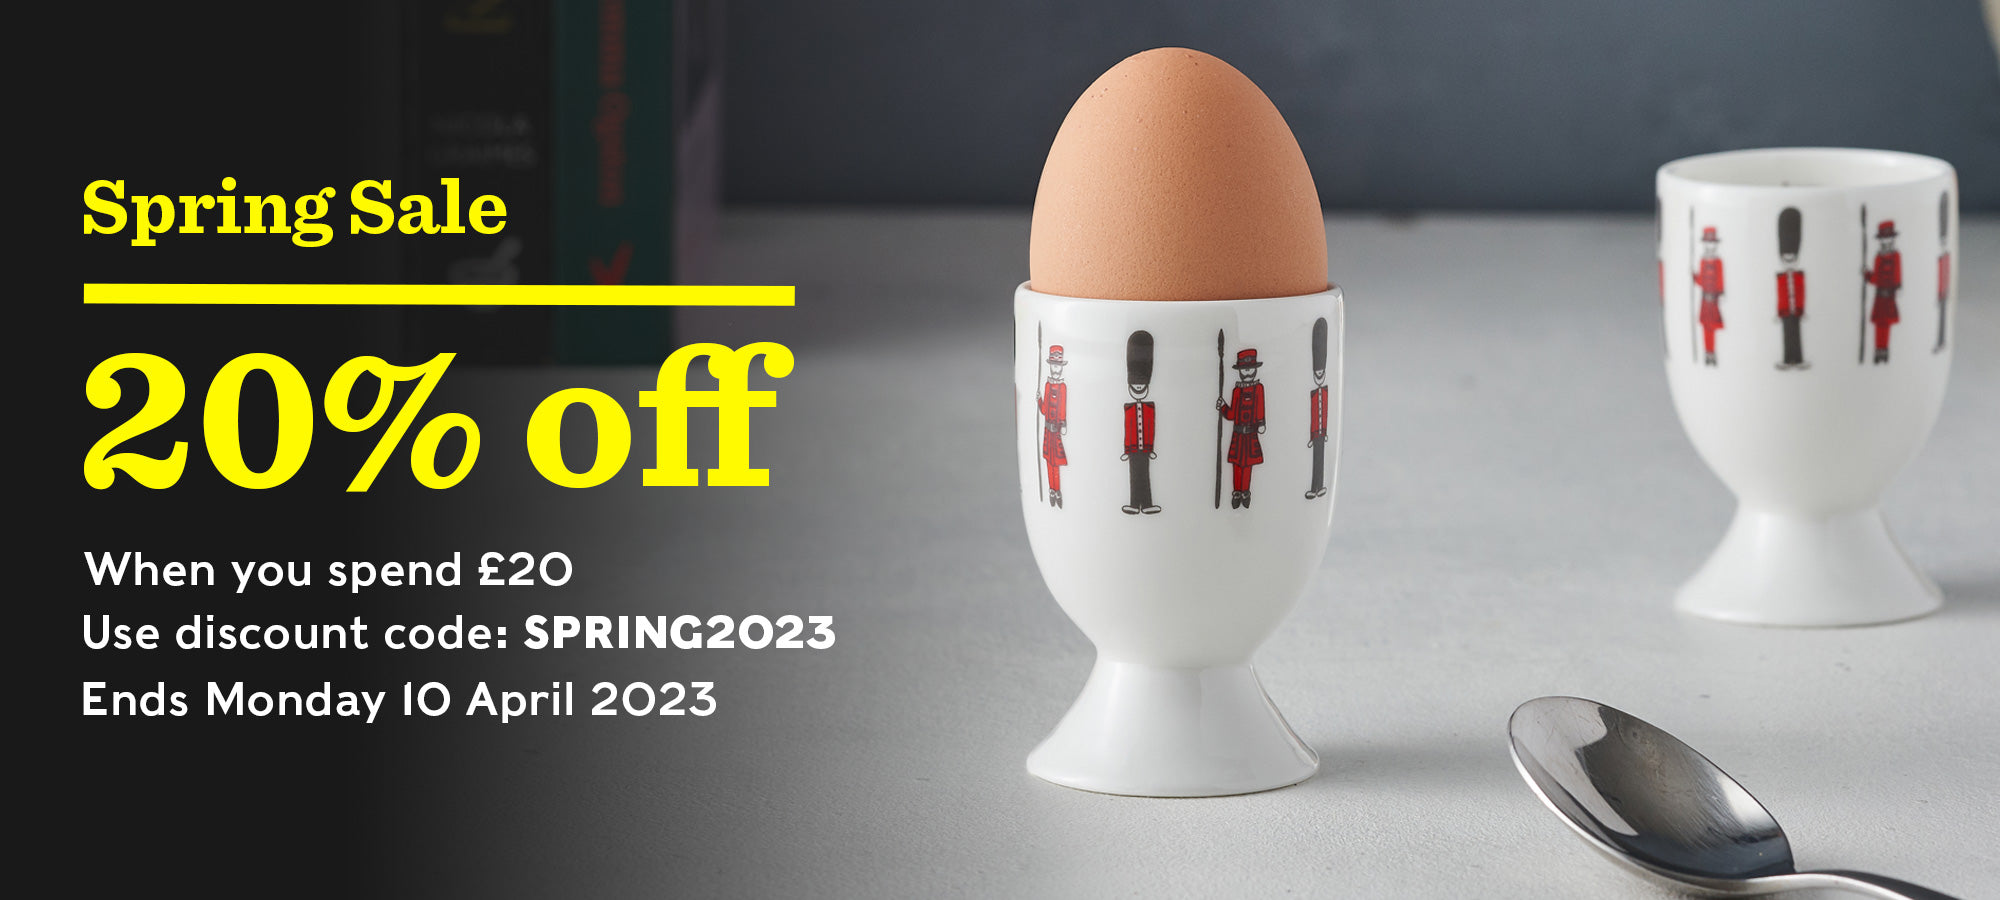 Spring Sale 2023 - Promotions page